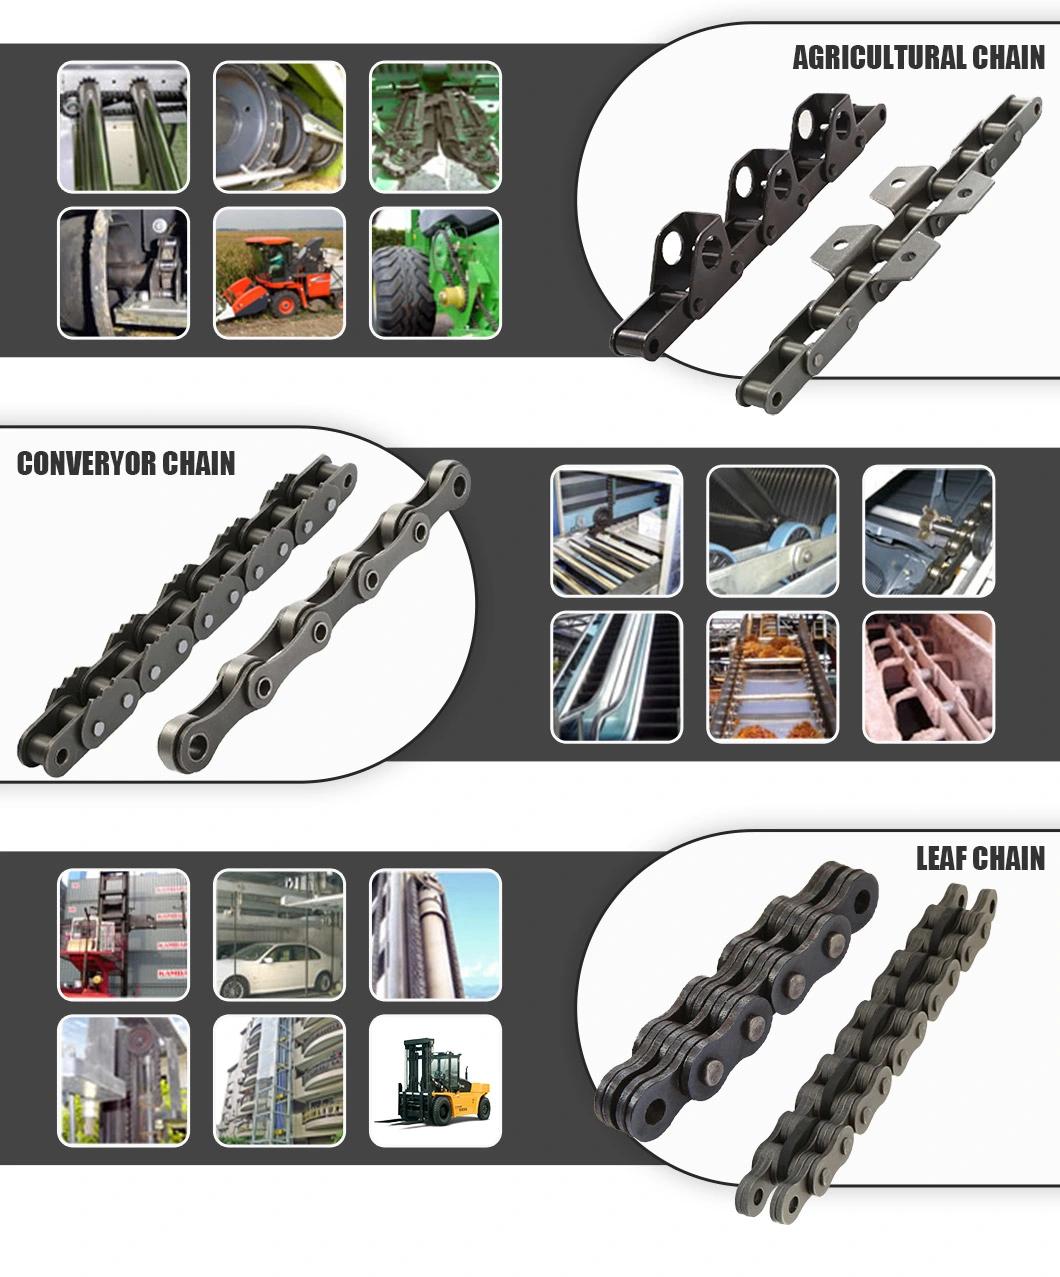 Professional Manufacturer Standard Conveyor Agricultural Chain with Attachment